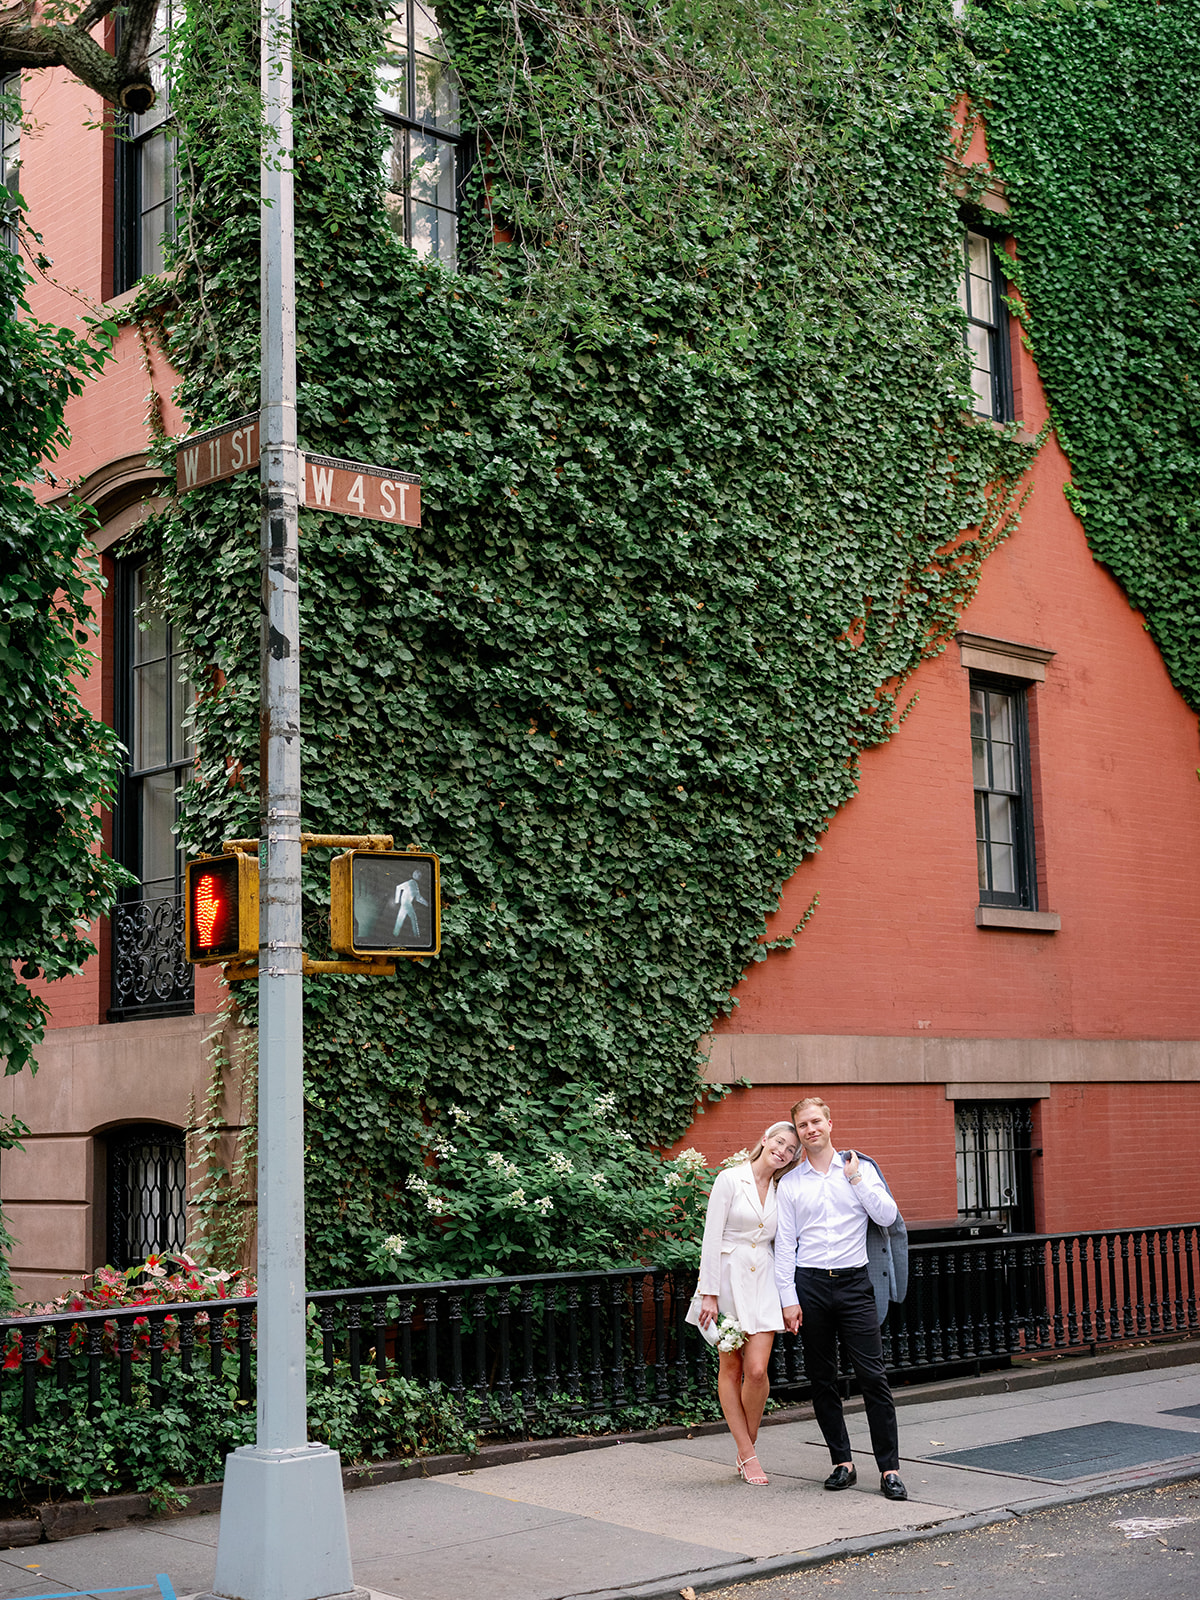 Bride and groom share a moment in Greenwich Village, framed by a brownstone adorned with greenery—a romantic New York portrait.